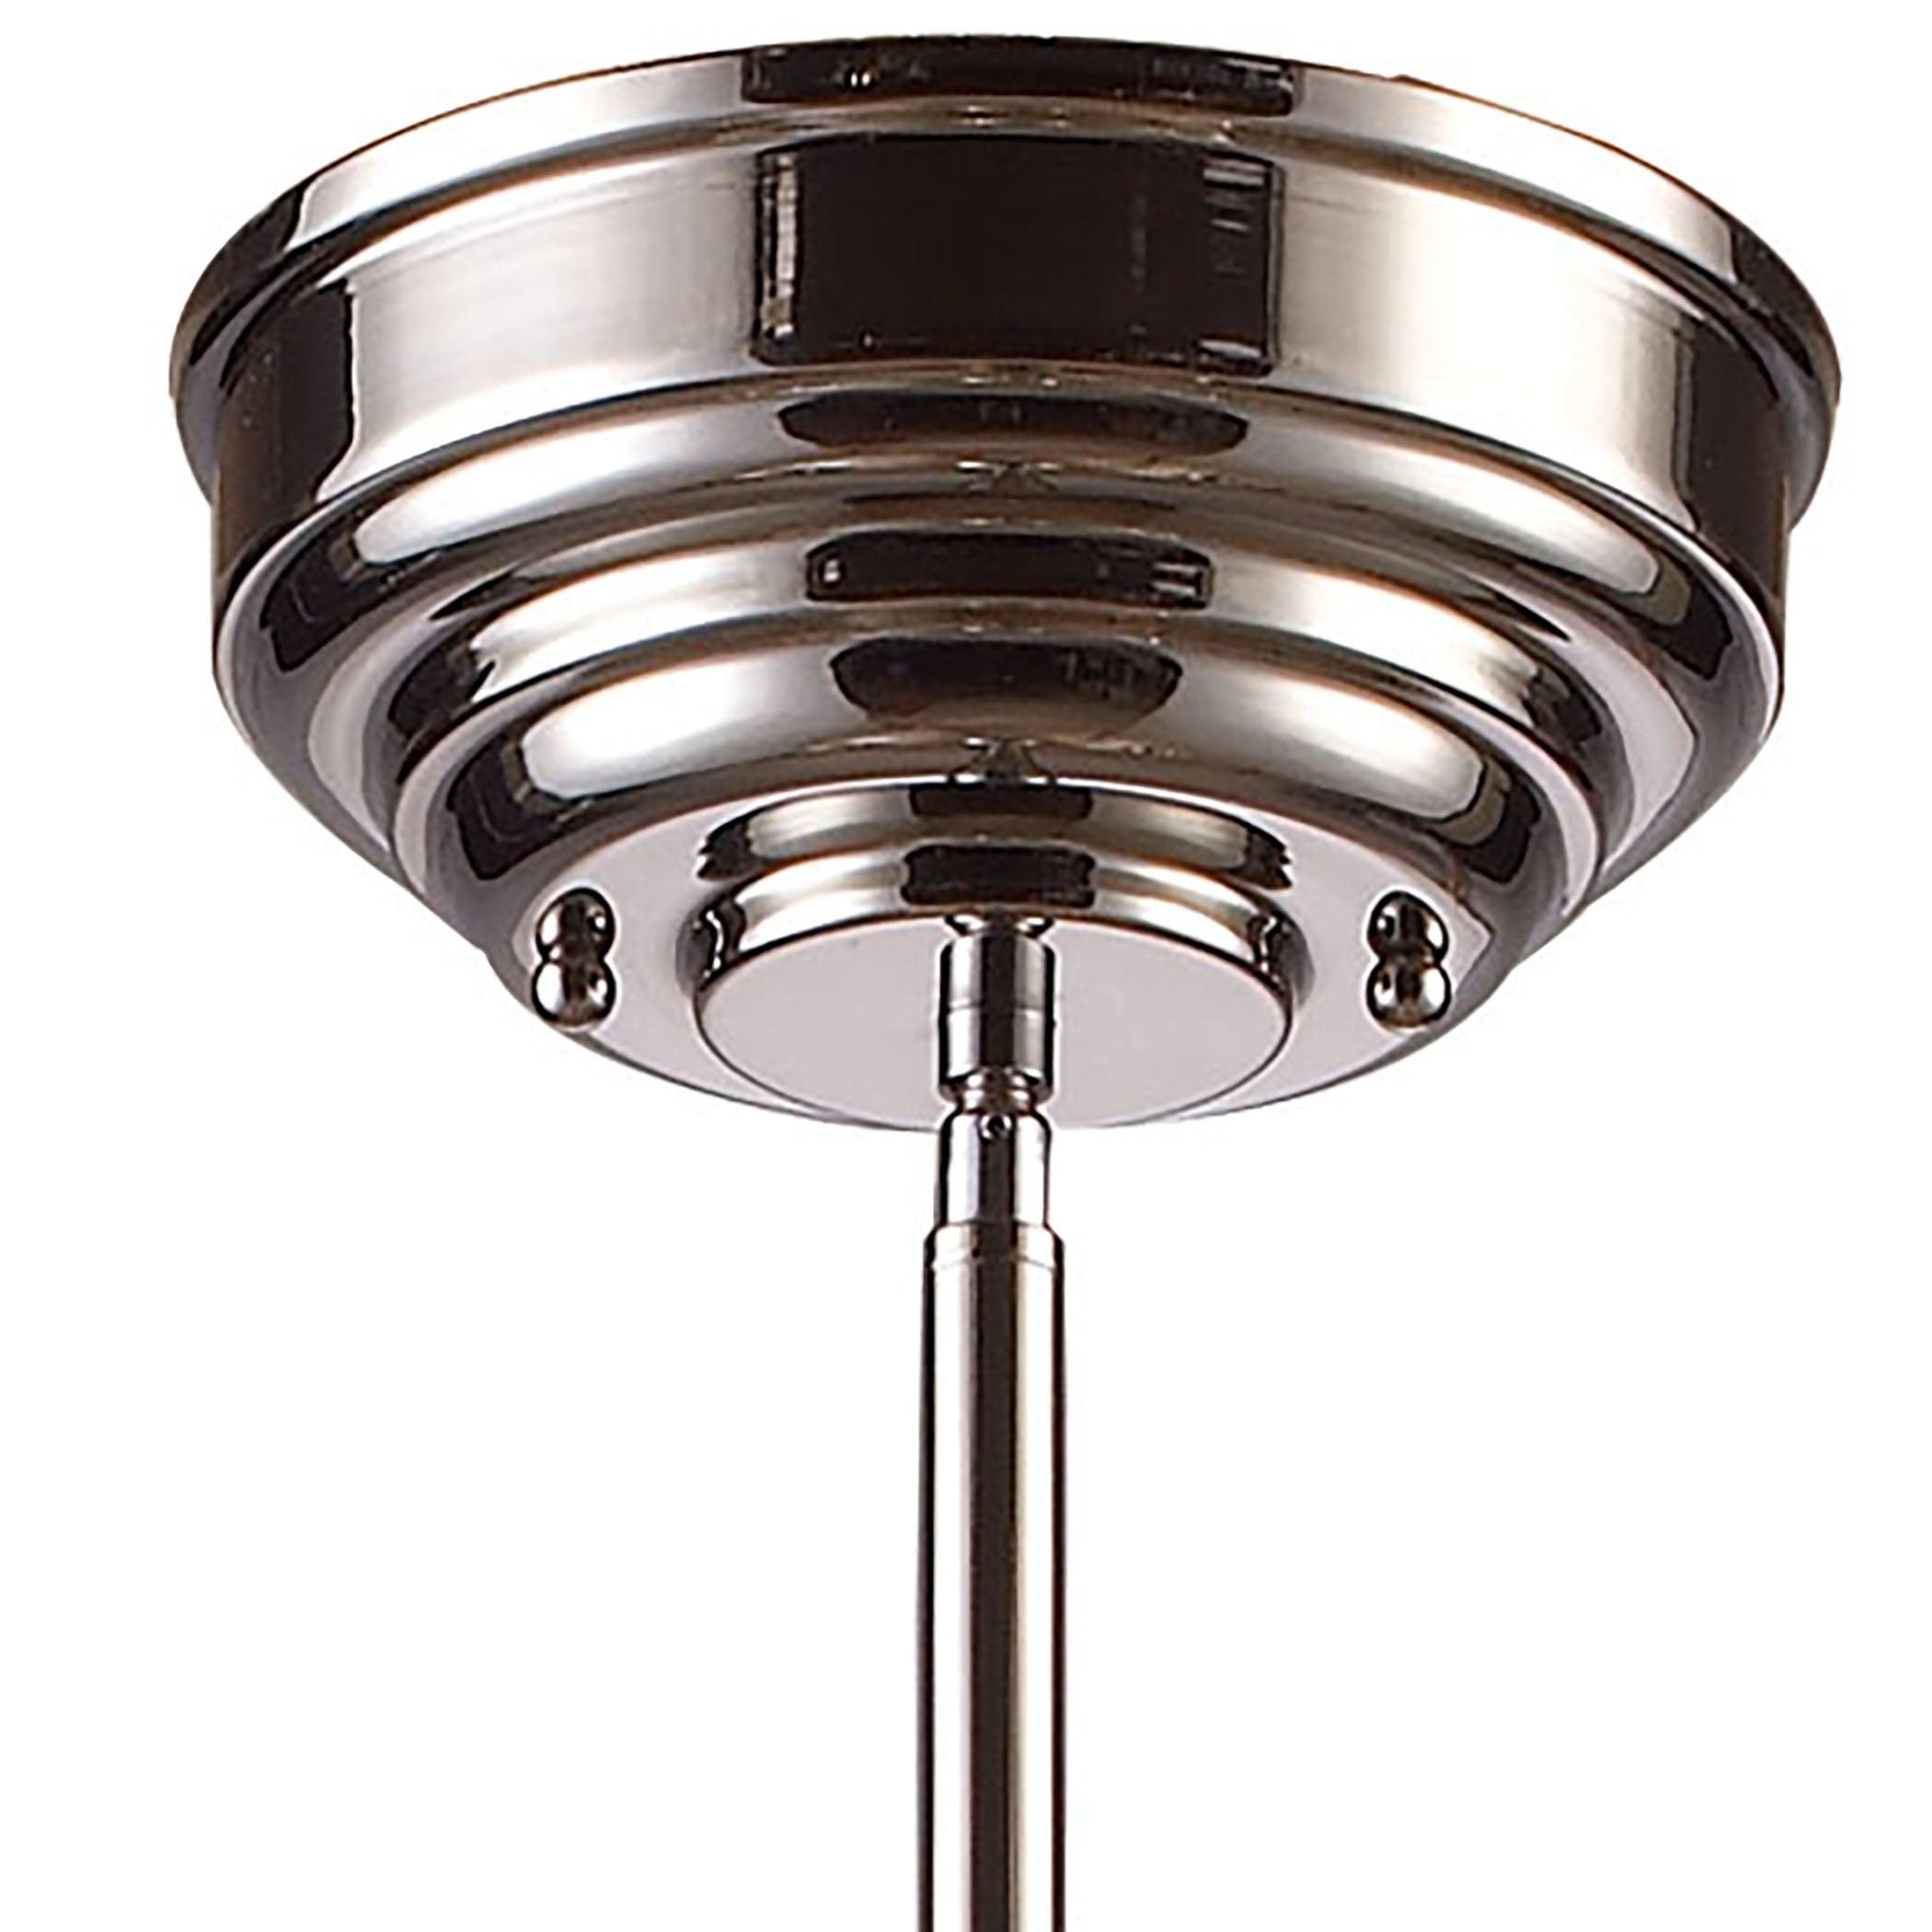 ELK Lighting 66115-3 Chadwick 3-Light Island Light in Polished Nickel with Matching Shades